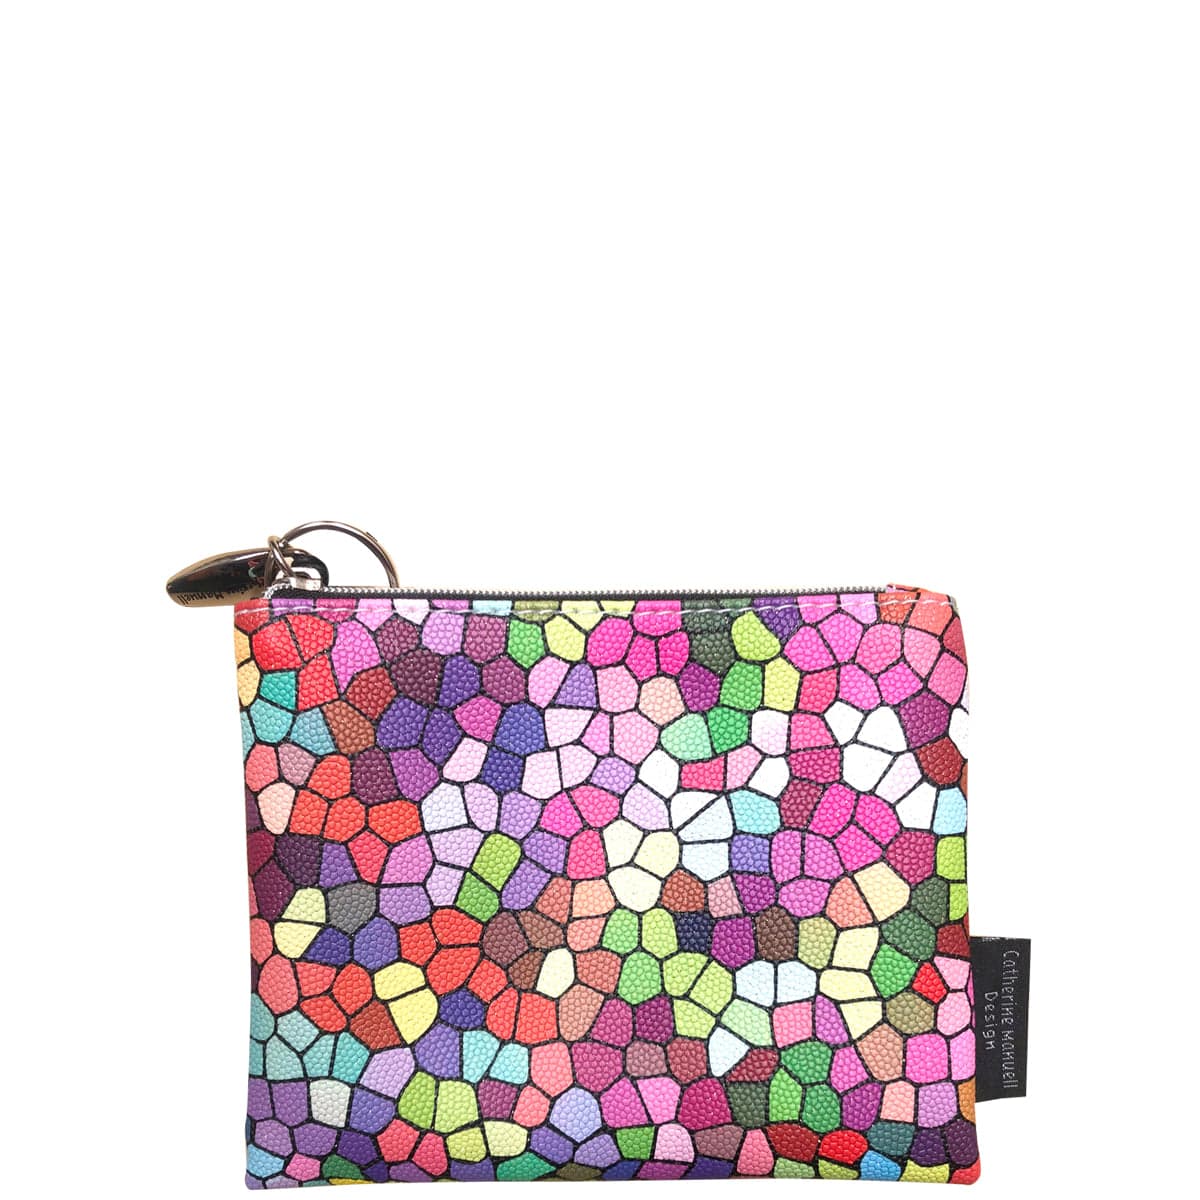 Everyday Purse - Colourful Pebbles